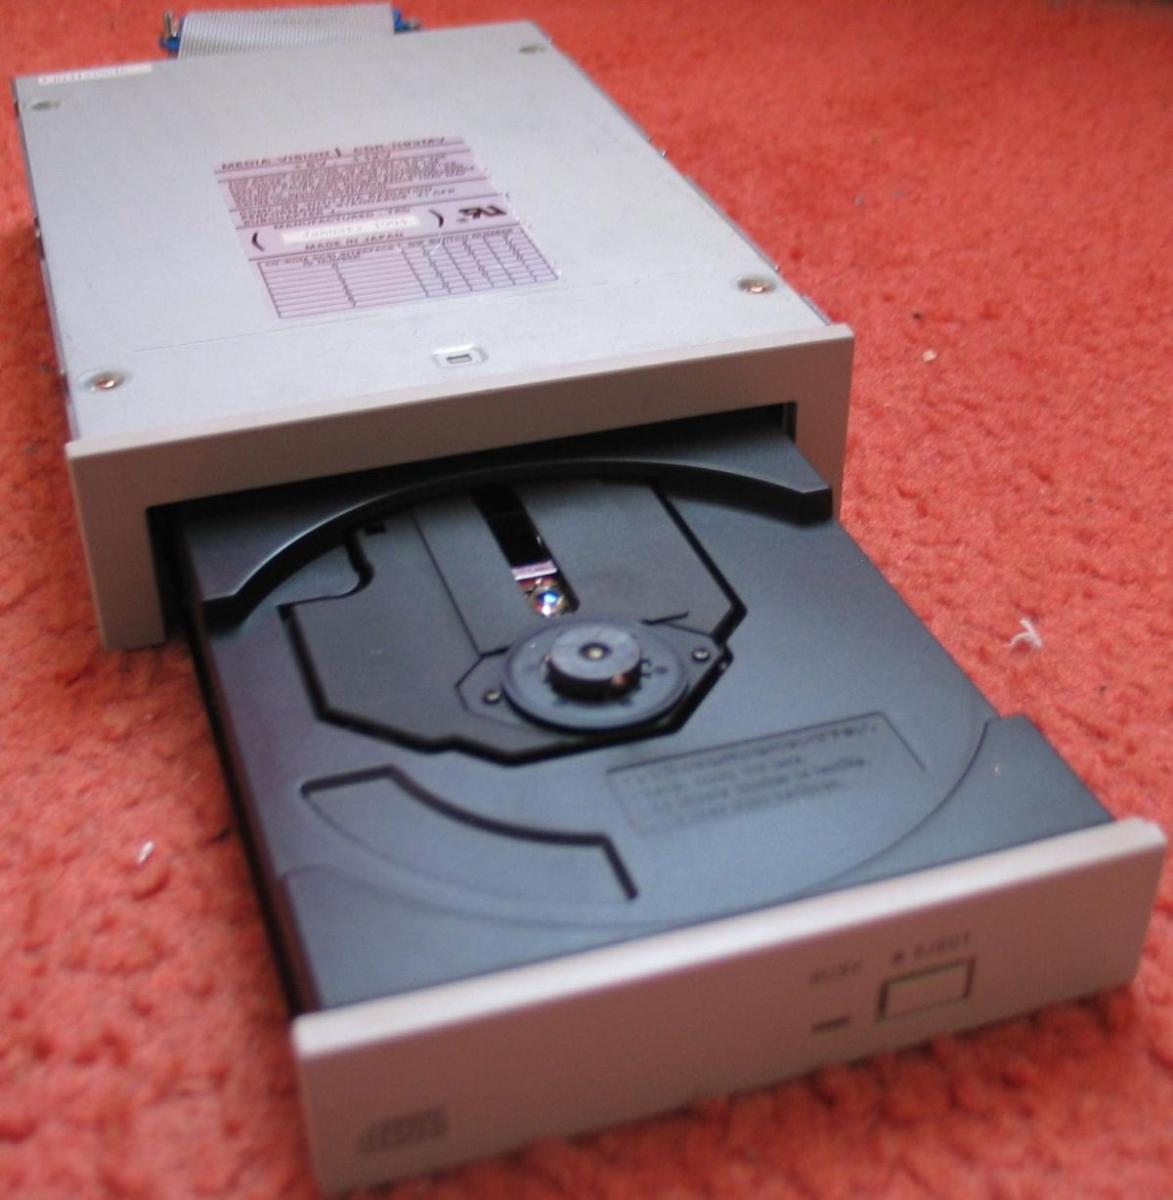 A CD Drive fit for a 2000!